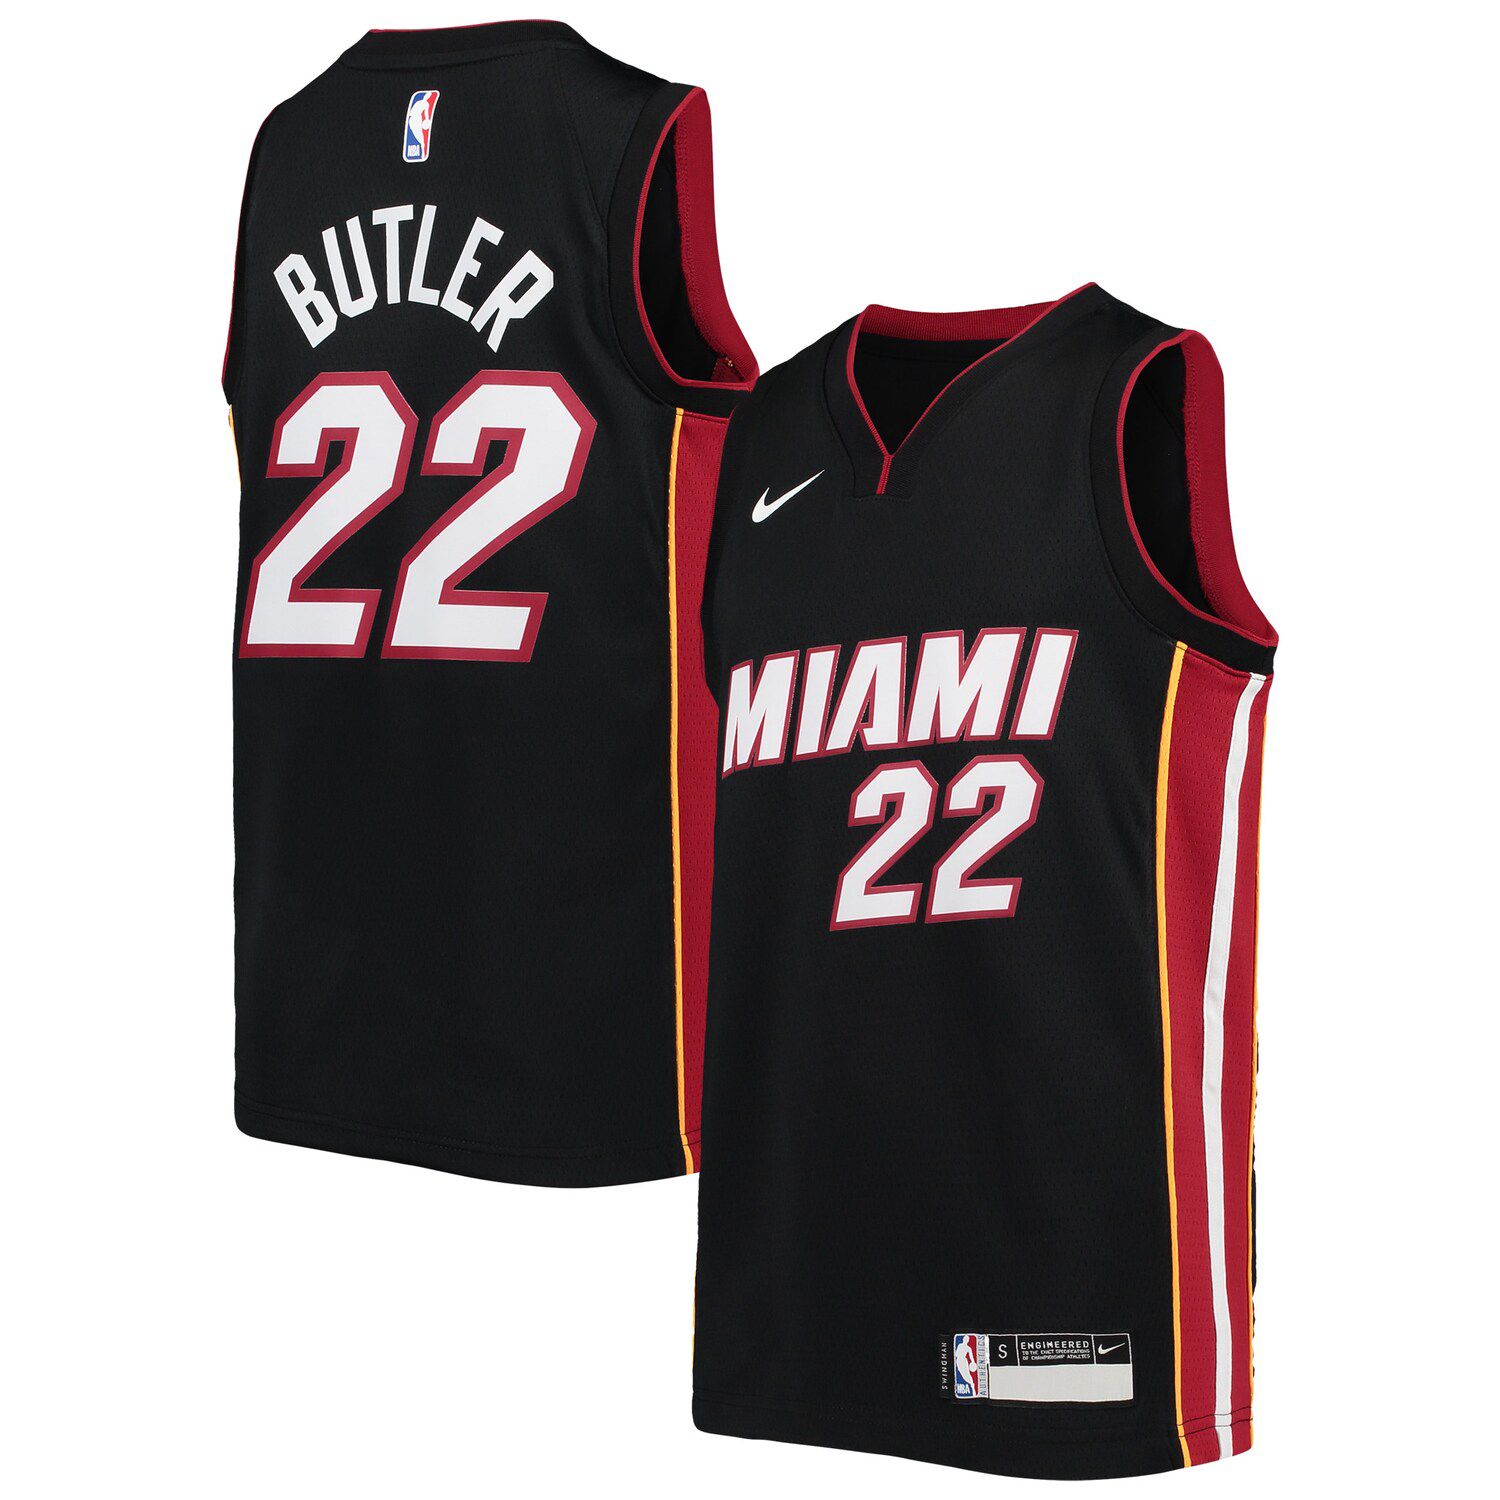 Youth Nike Jimmy Butler Black Miami 